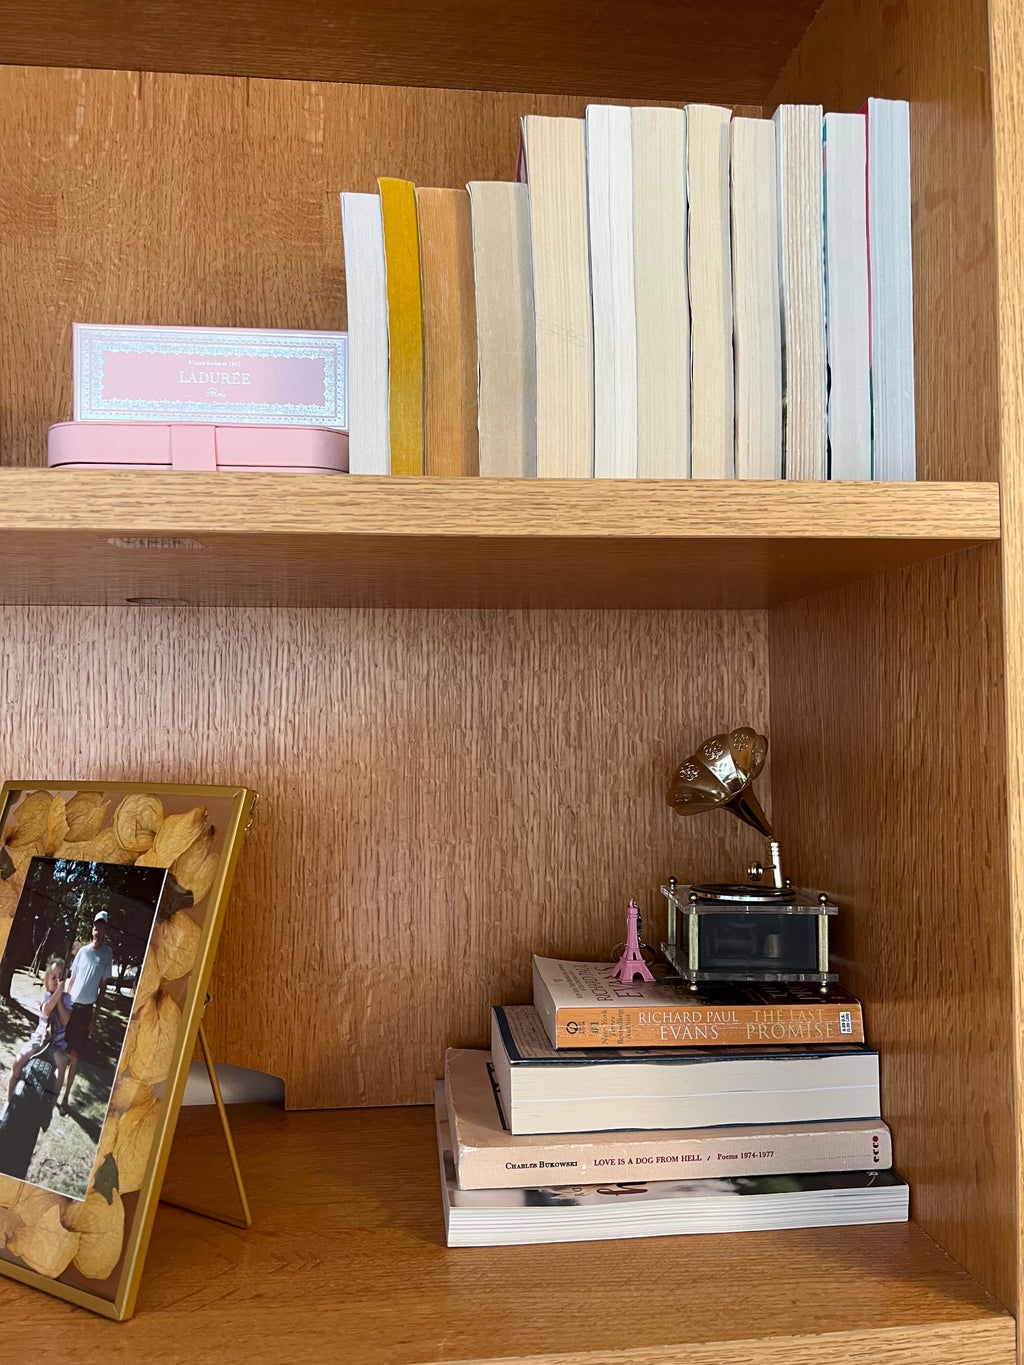 Bookshelf display (photo for reference of what is mentioned in article)